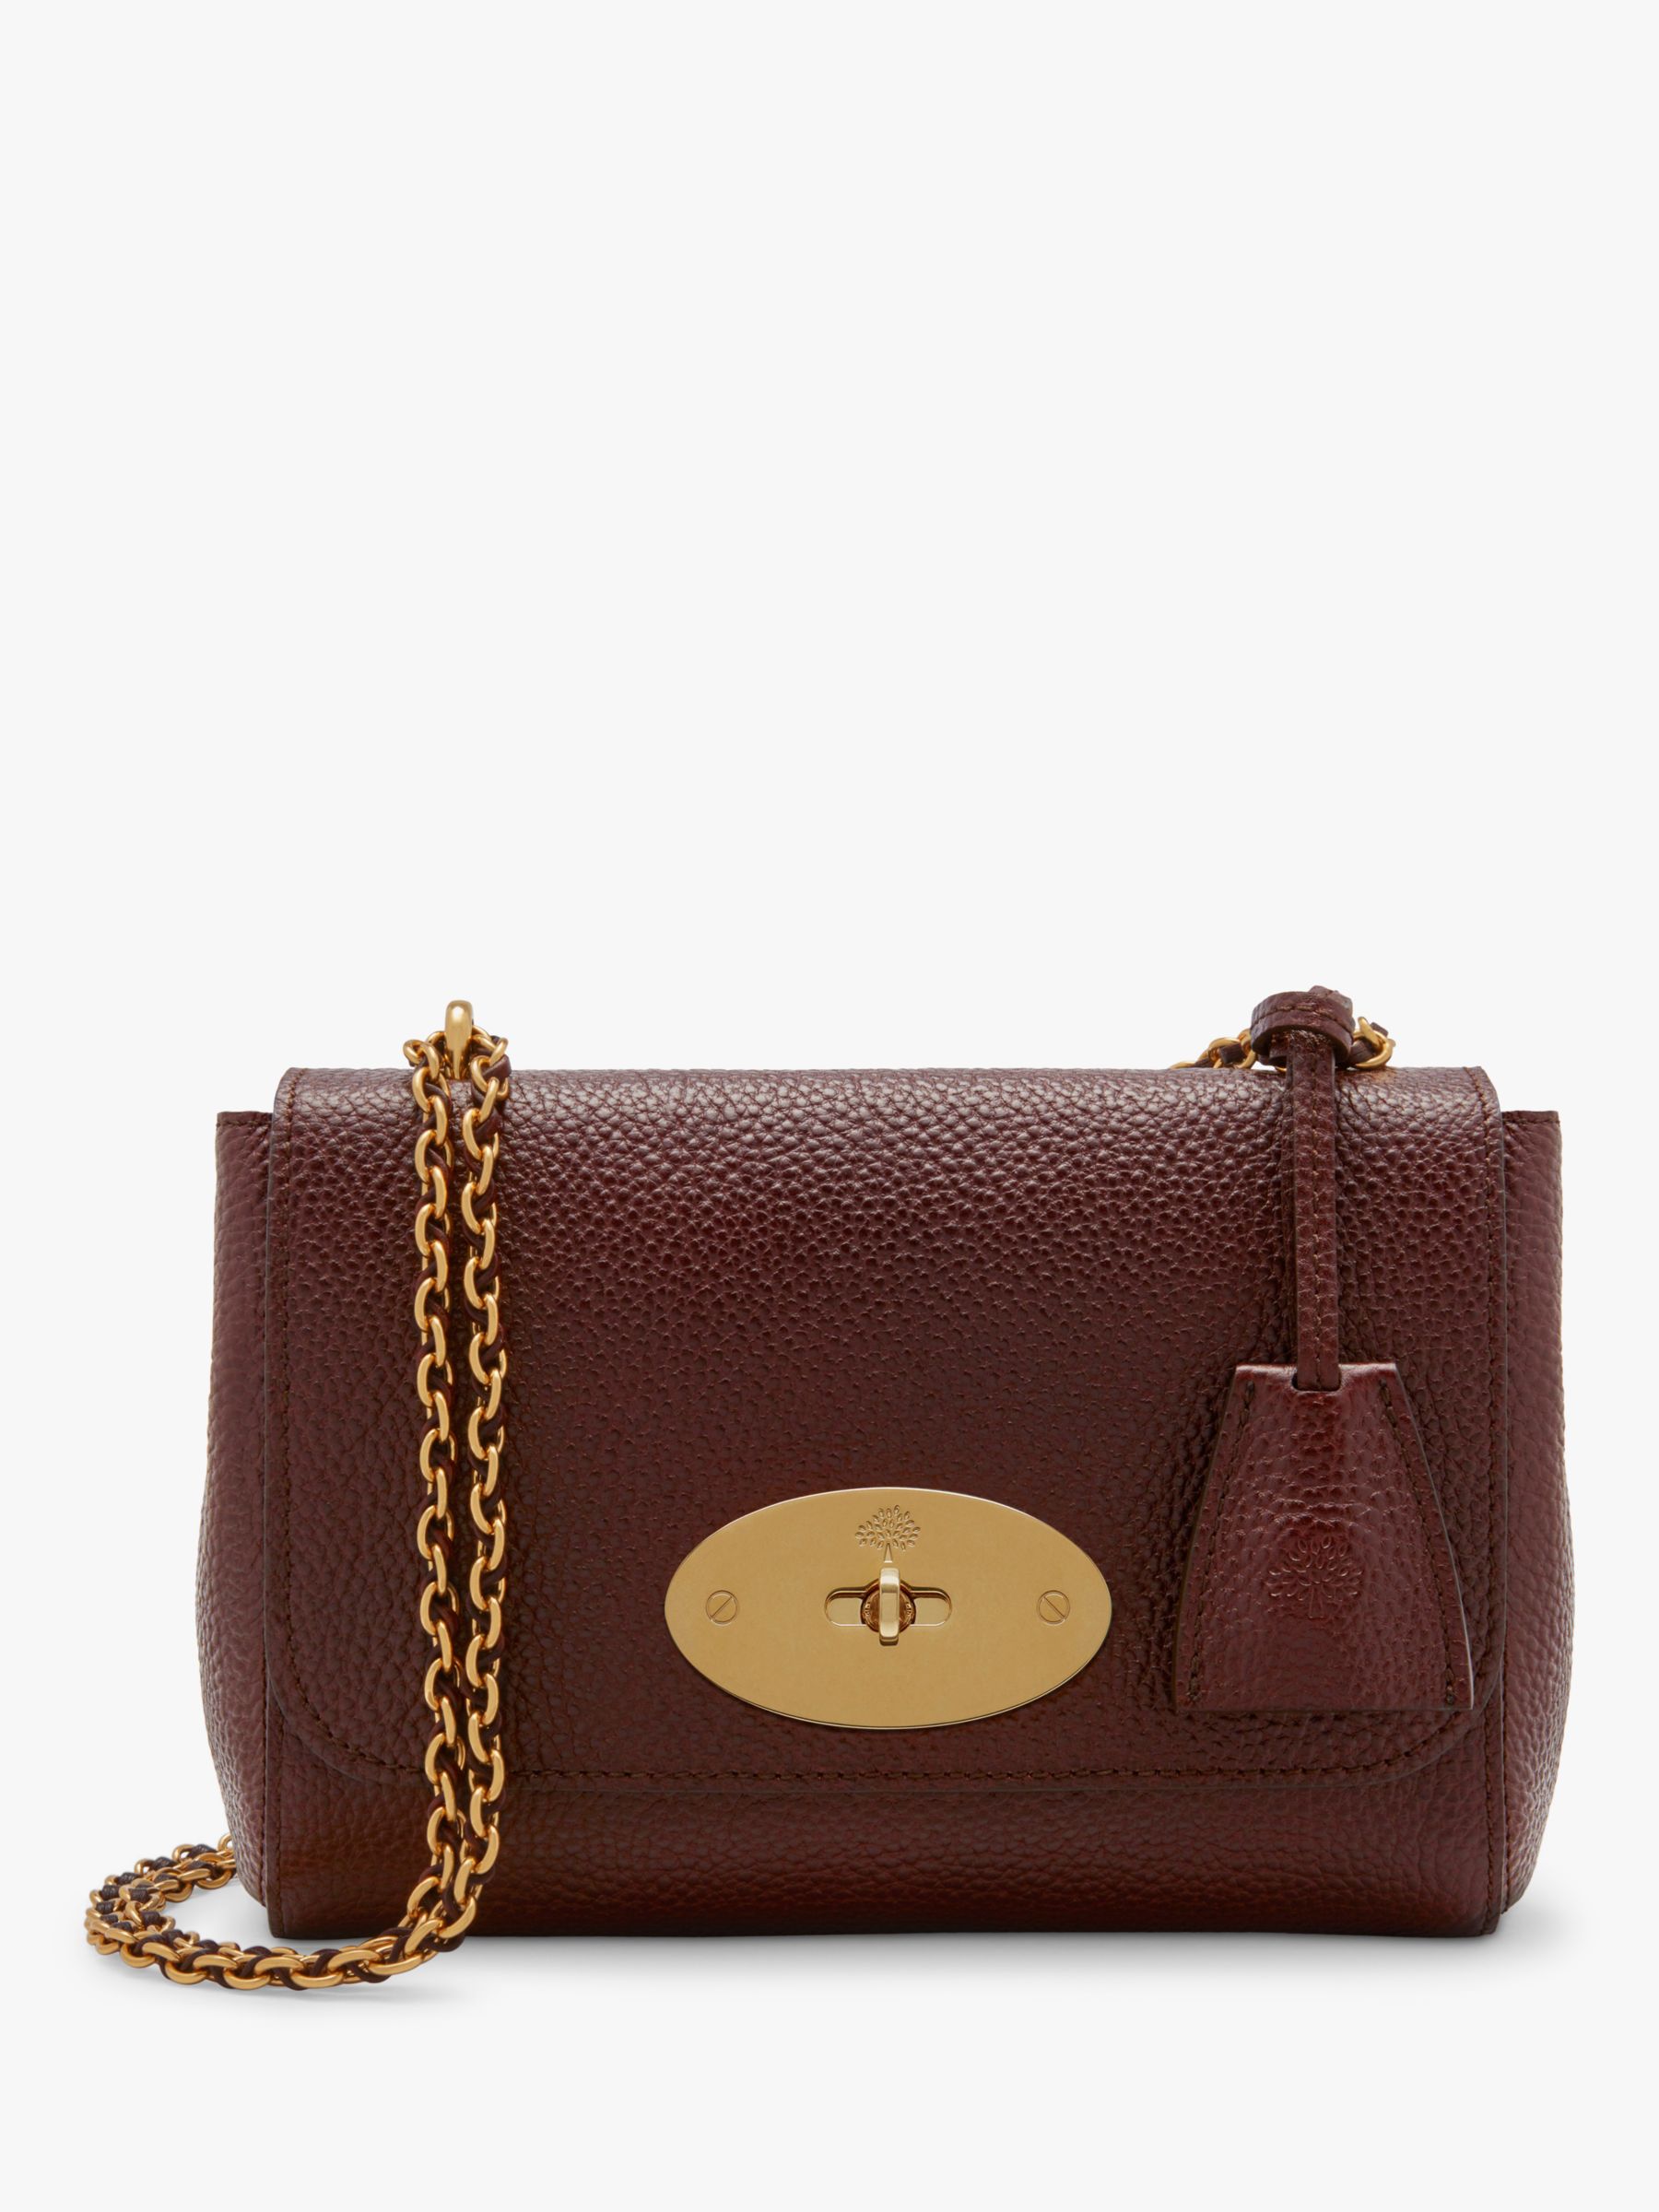 Mulberry Lily Classic Grain Leather Shoulder Bag, Oxblood at John Lewis ...